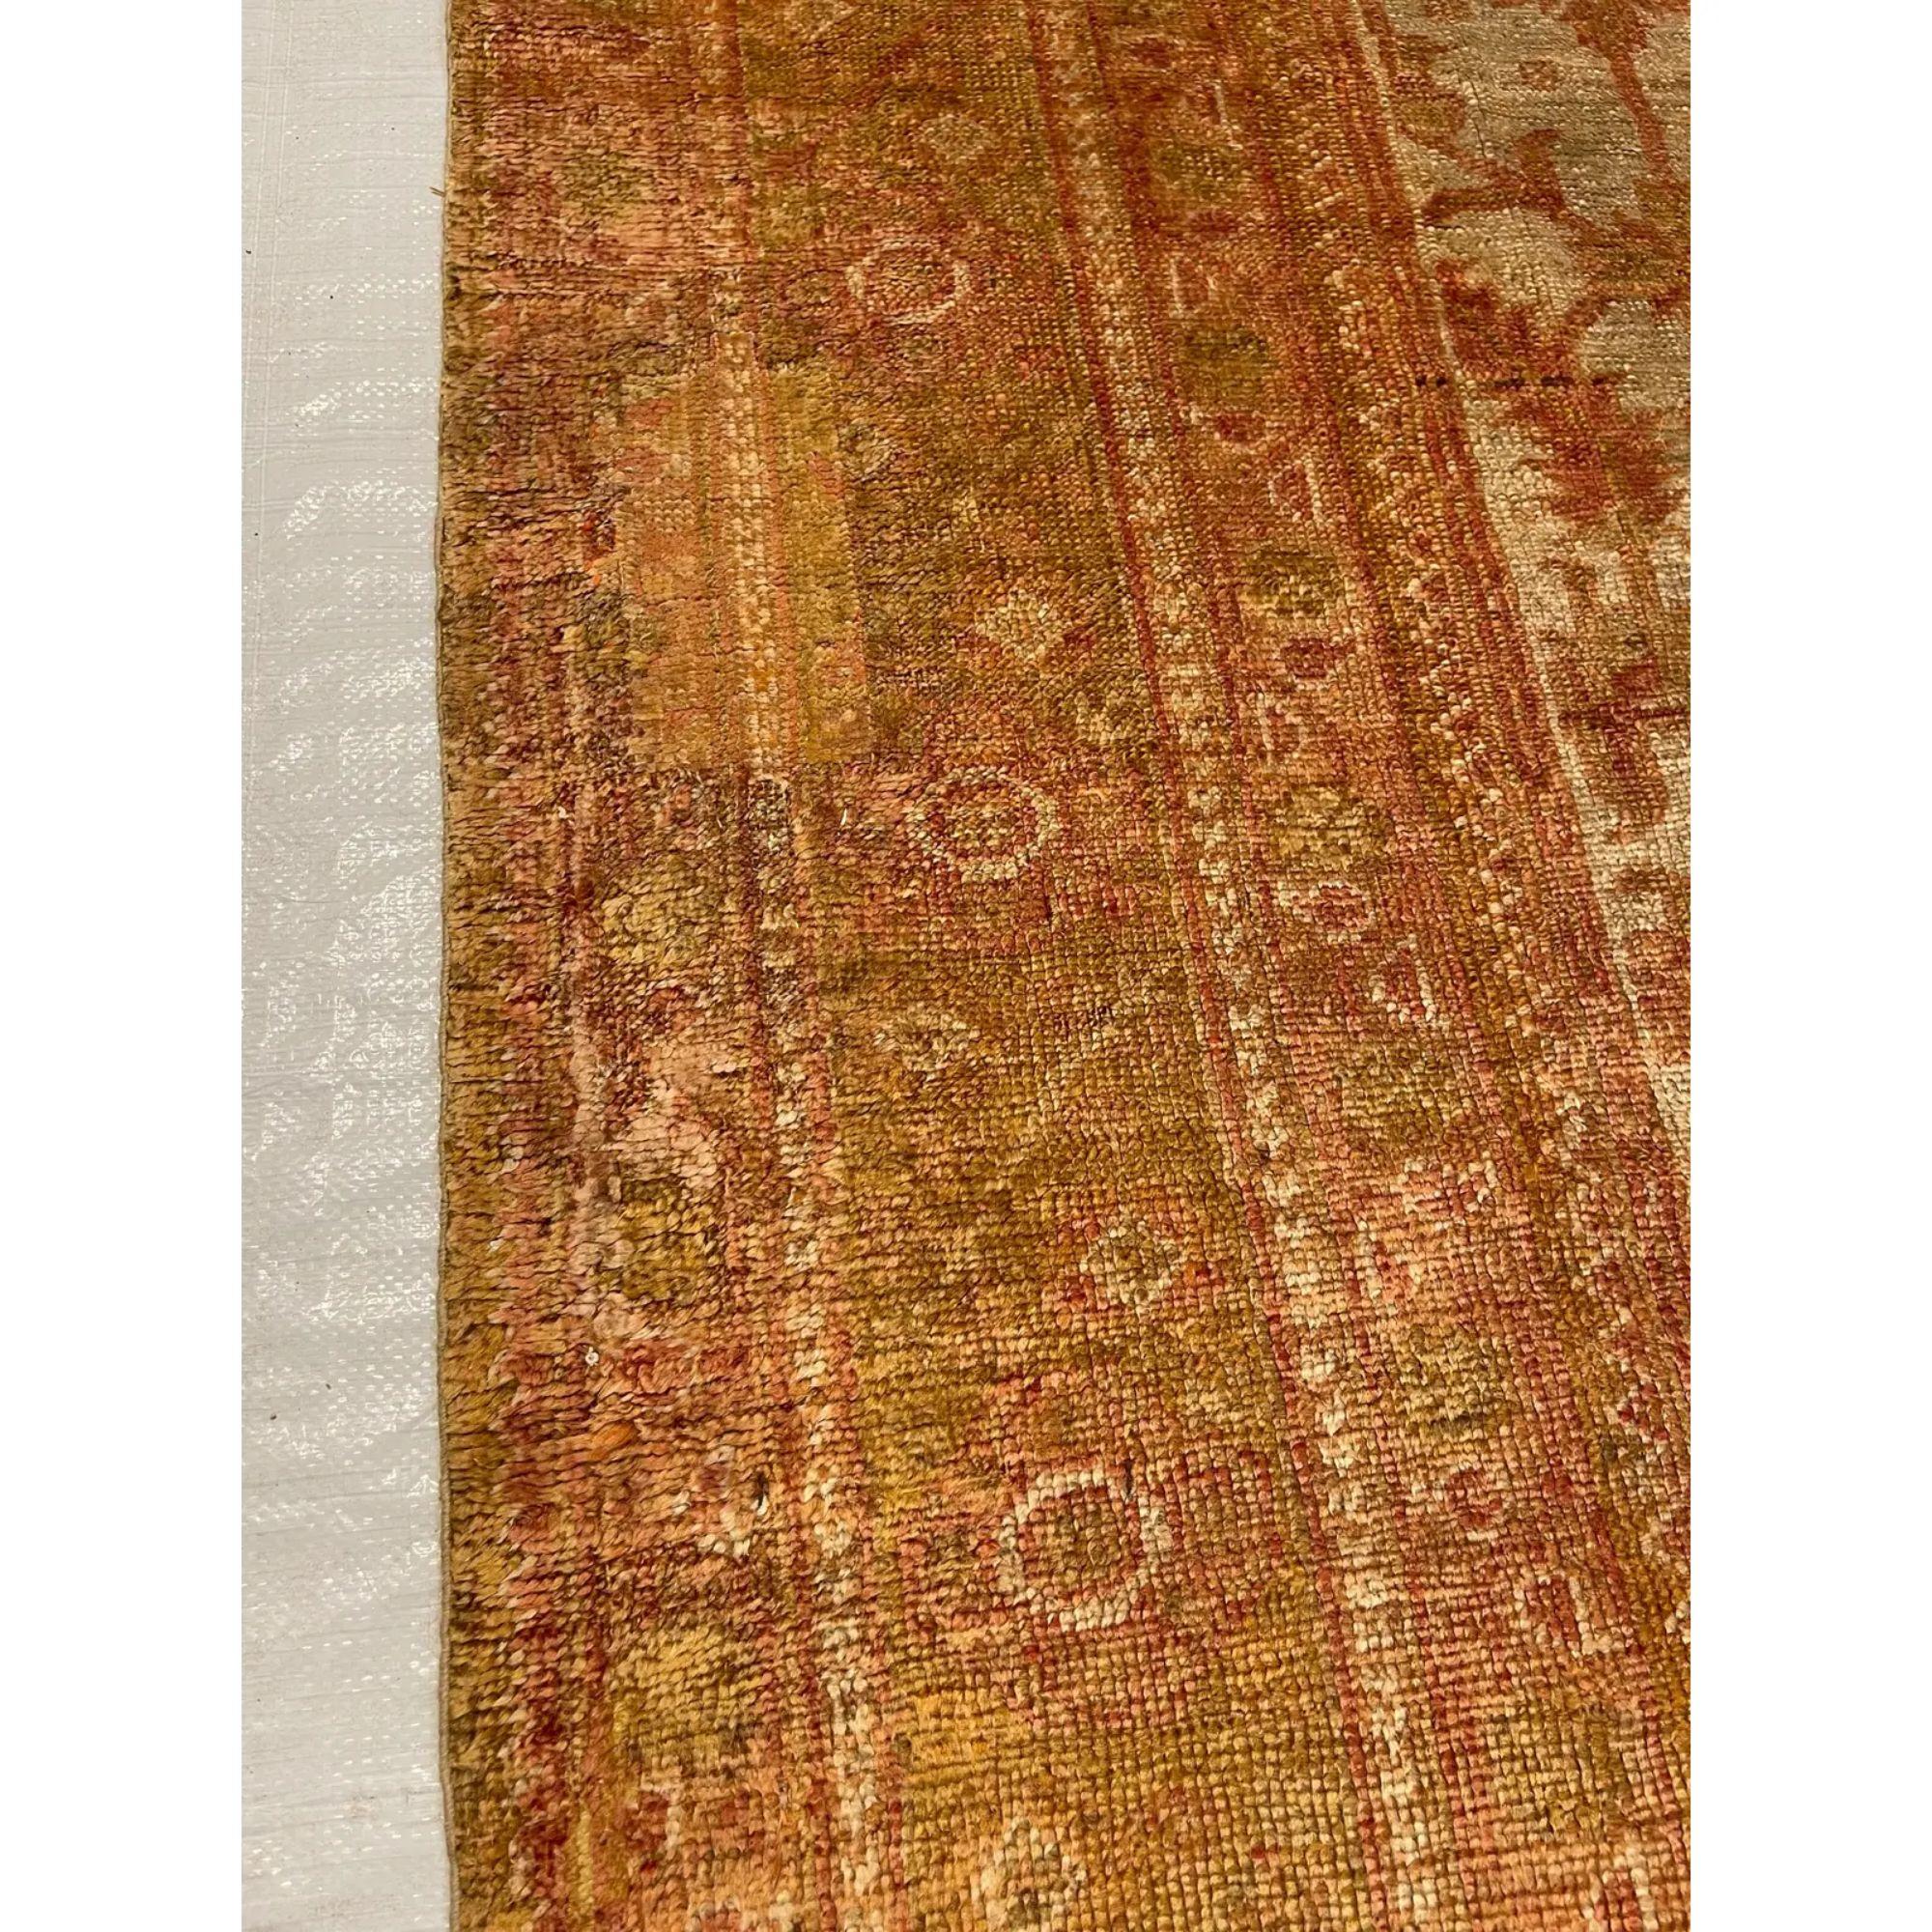 Ca.1880 Antique Turkish Oushak Floral Design Rug 8' X 8'4'' In Good Condition For Sale In Los Angeles, US